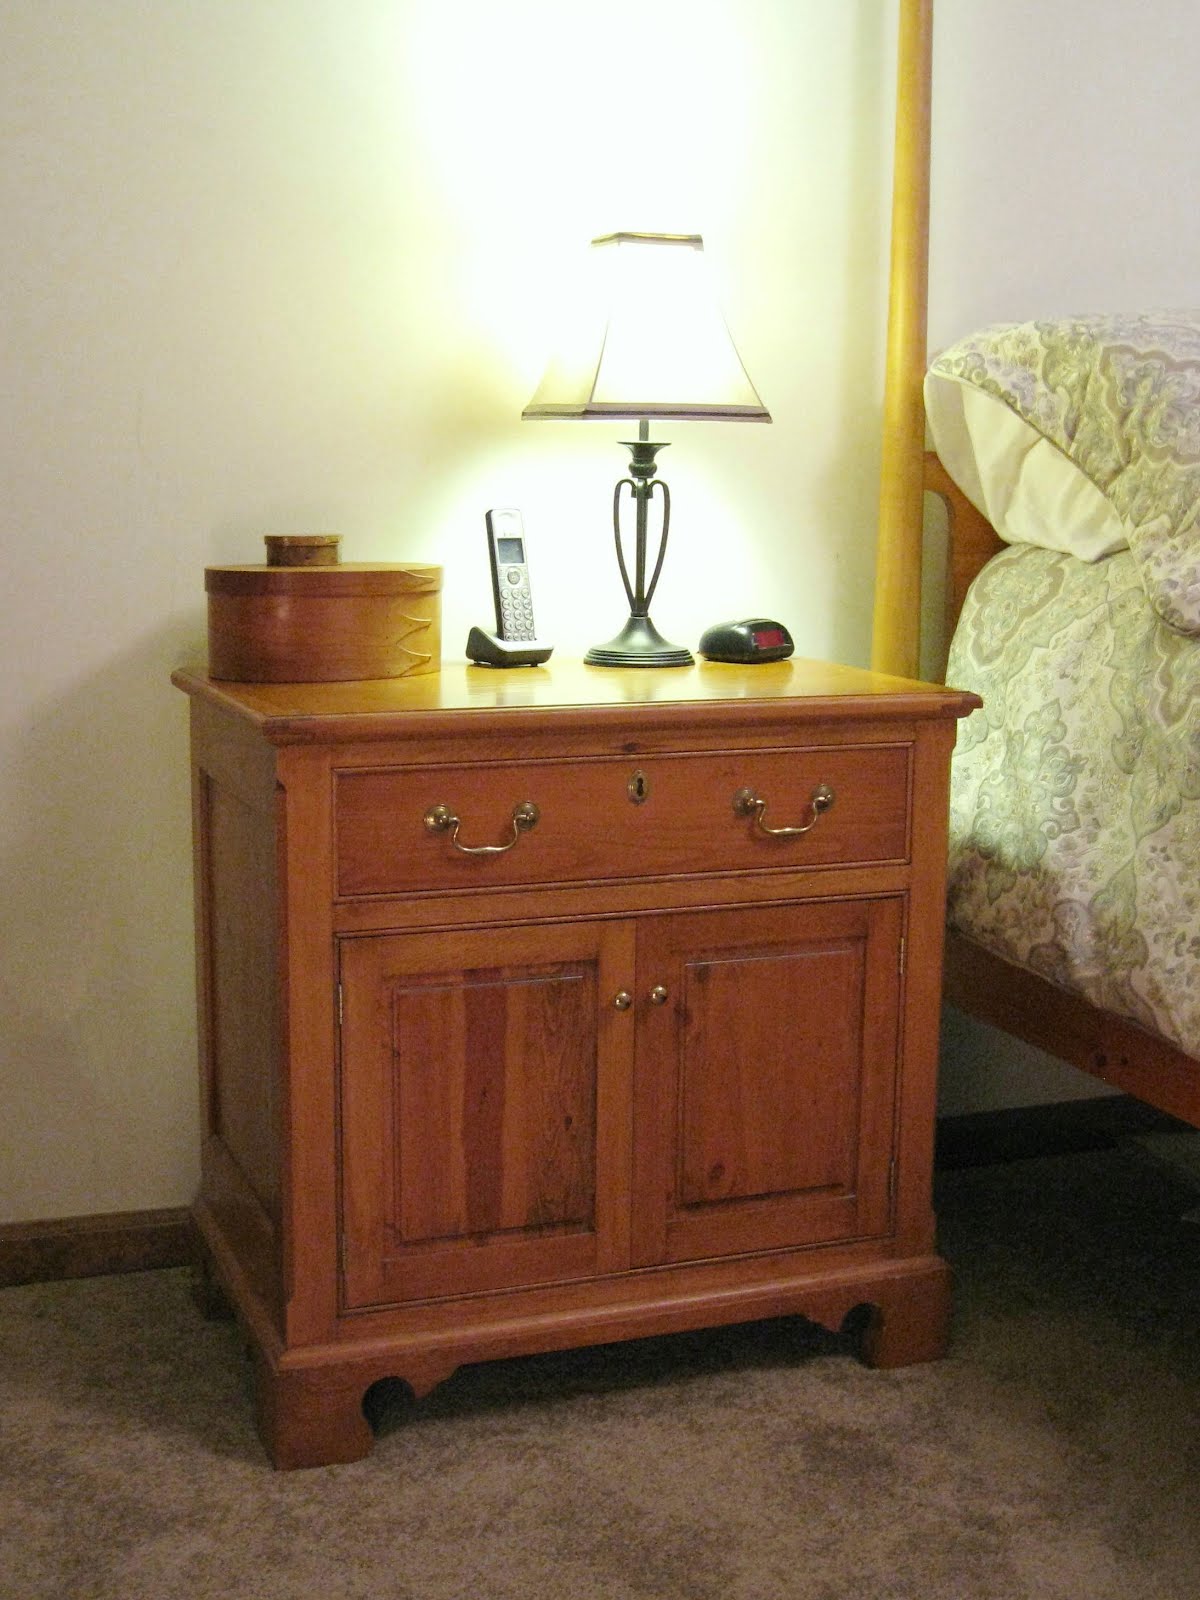 woodfever.net: Free Woodworking Plan: You Can Build a Bedside Table